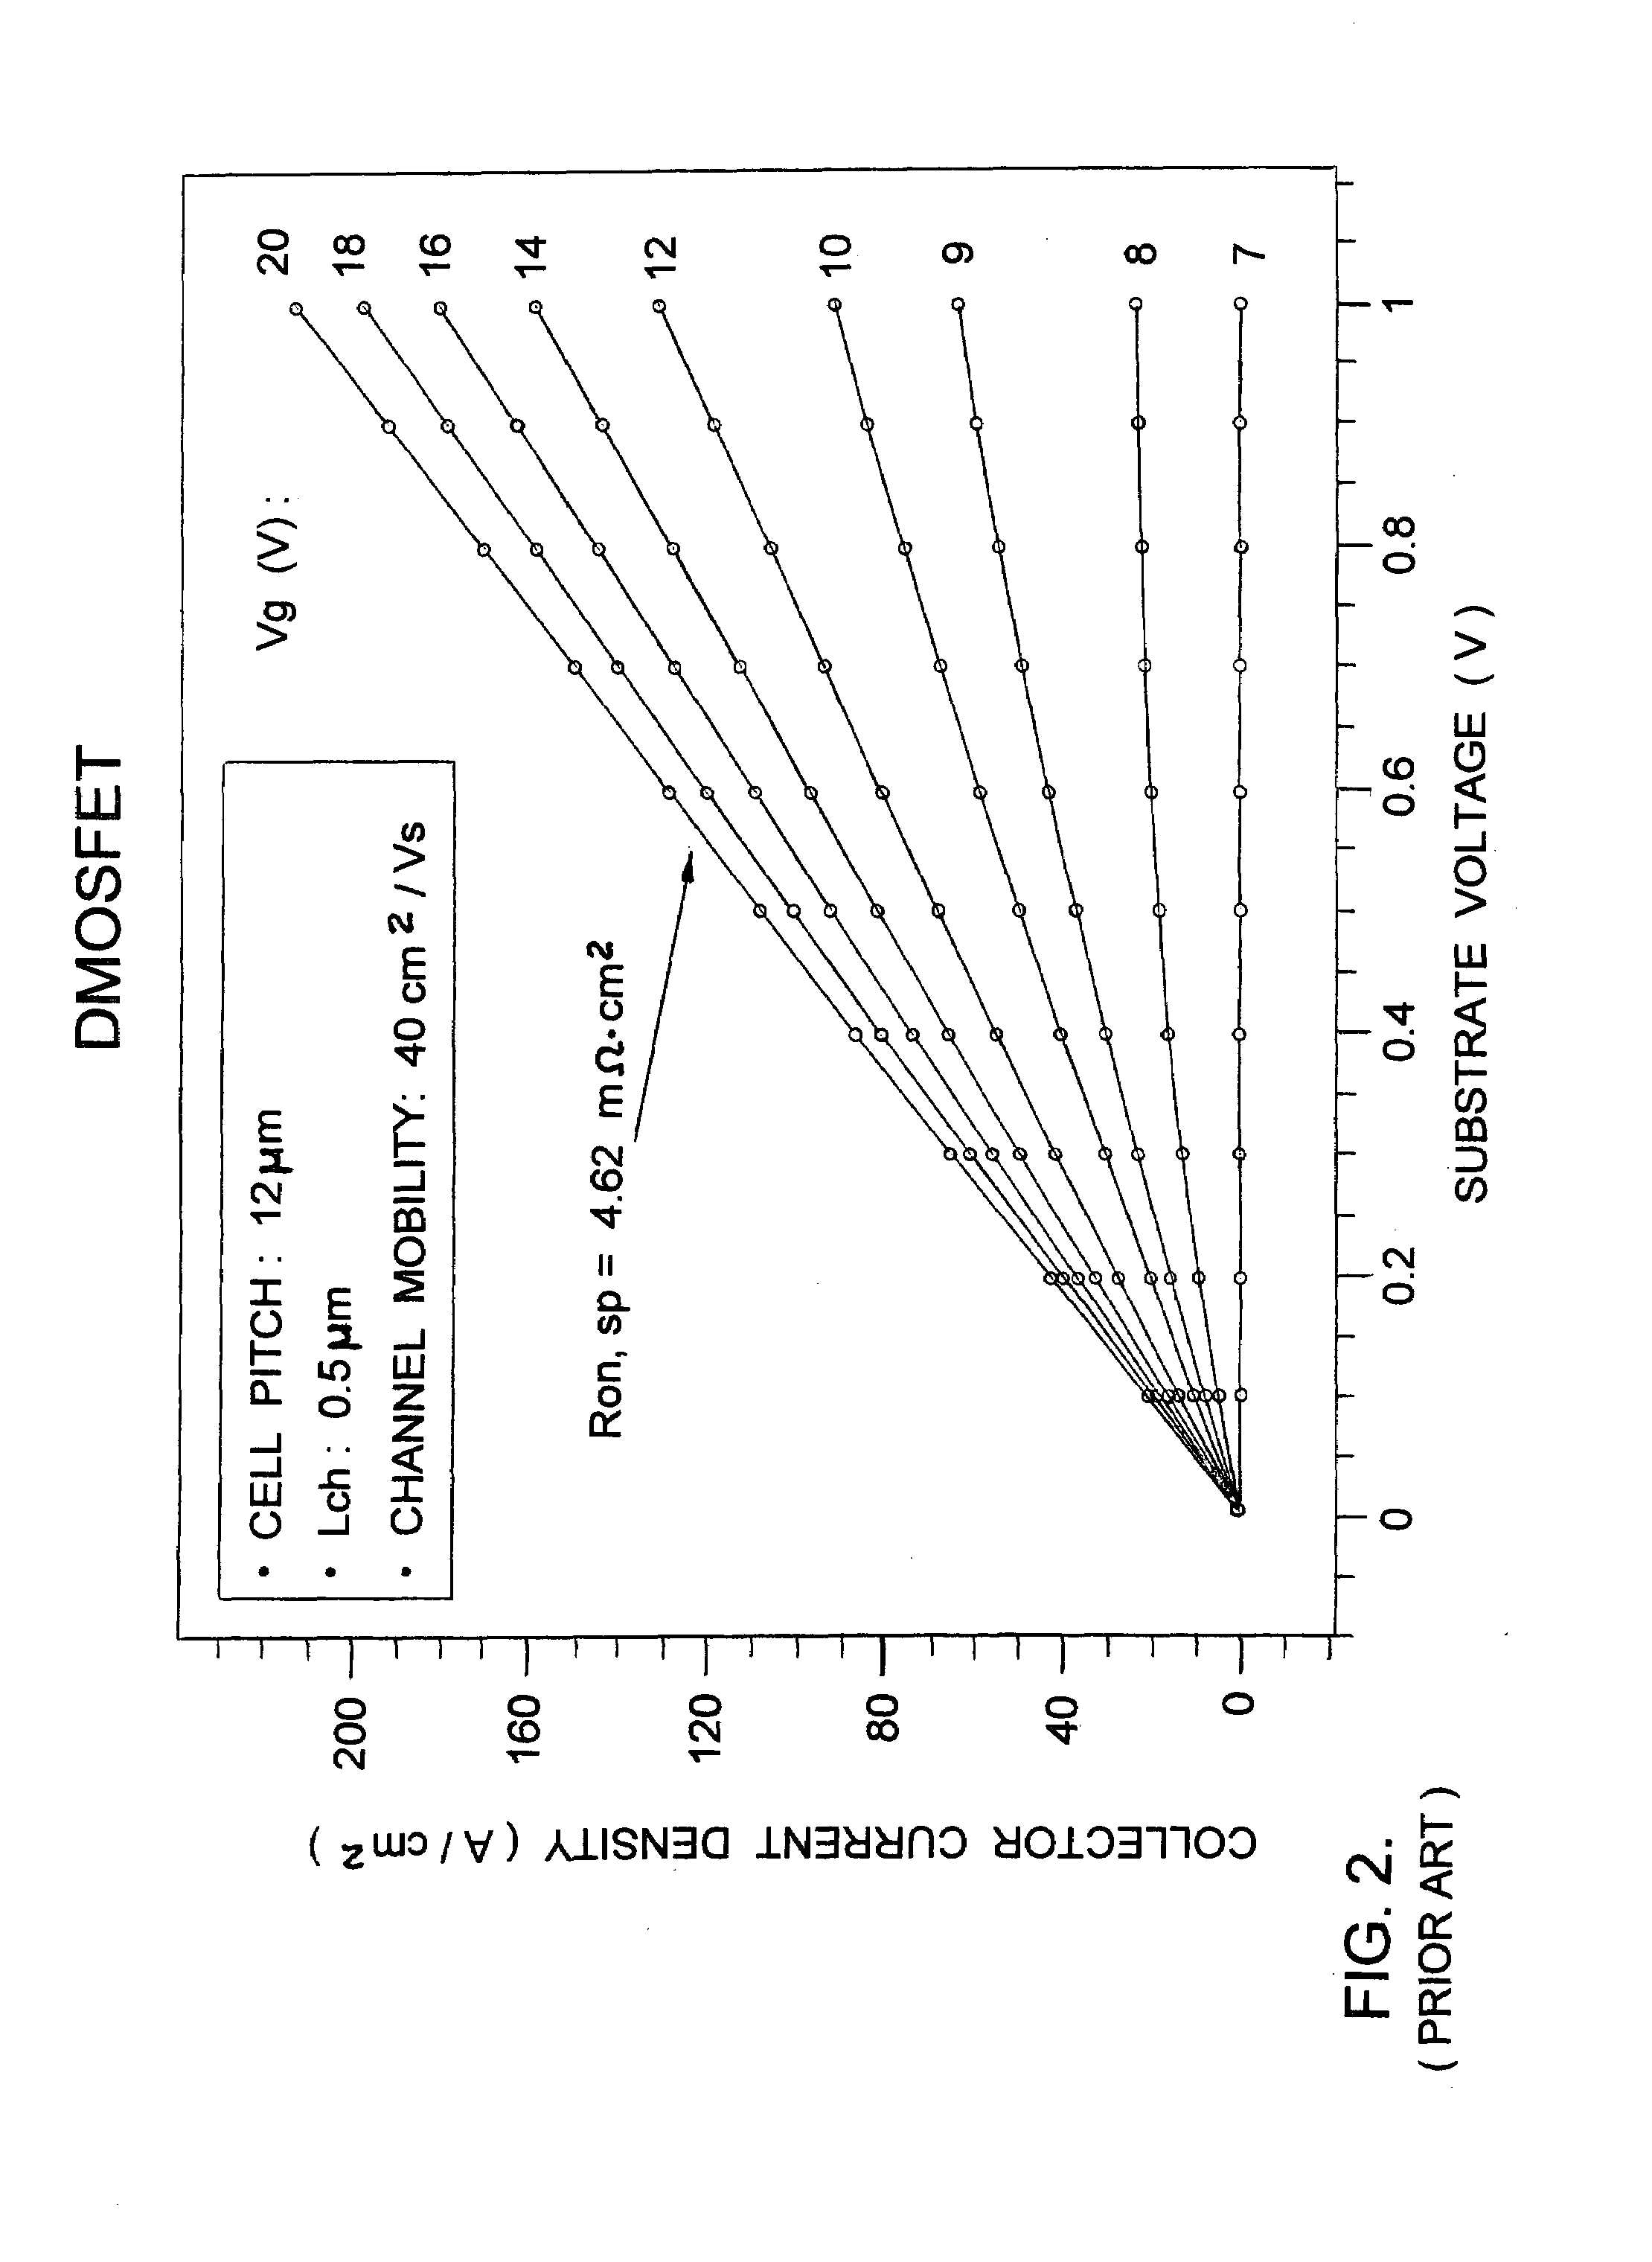 Transistor with A-Face Conductive Channel and Trench Protecting Well Region